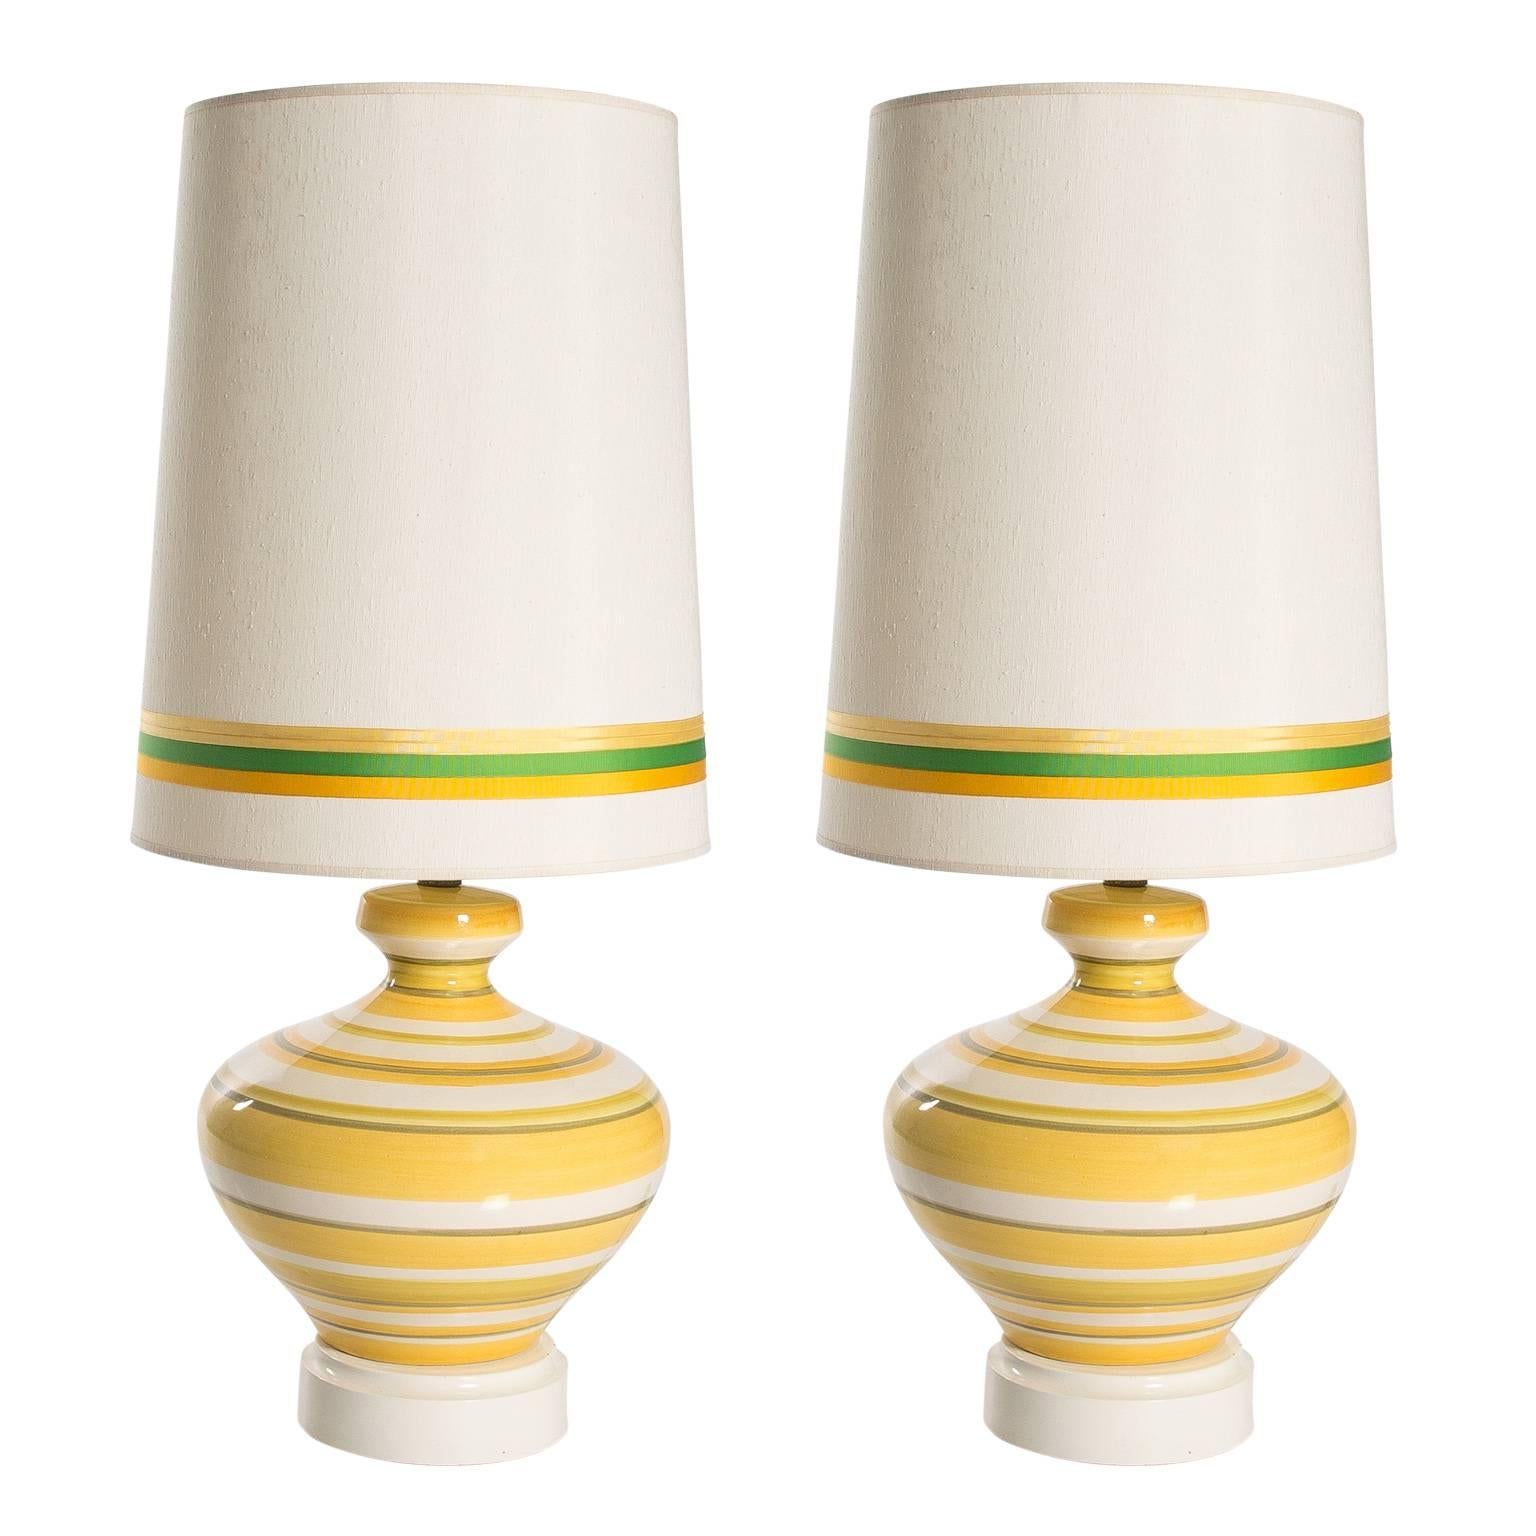 Pair of Ceramic Yellow and White Table Lamps